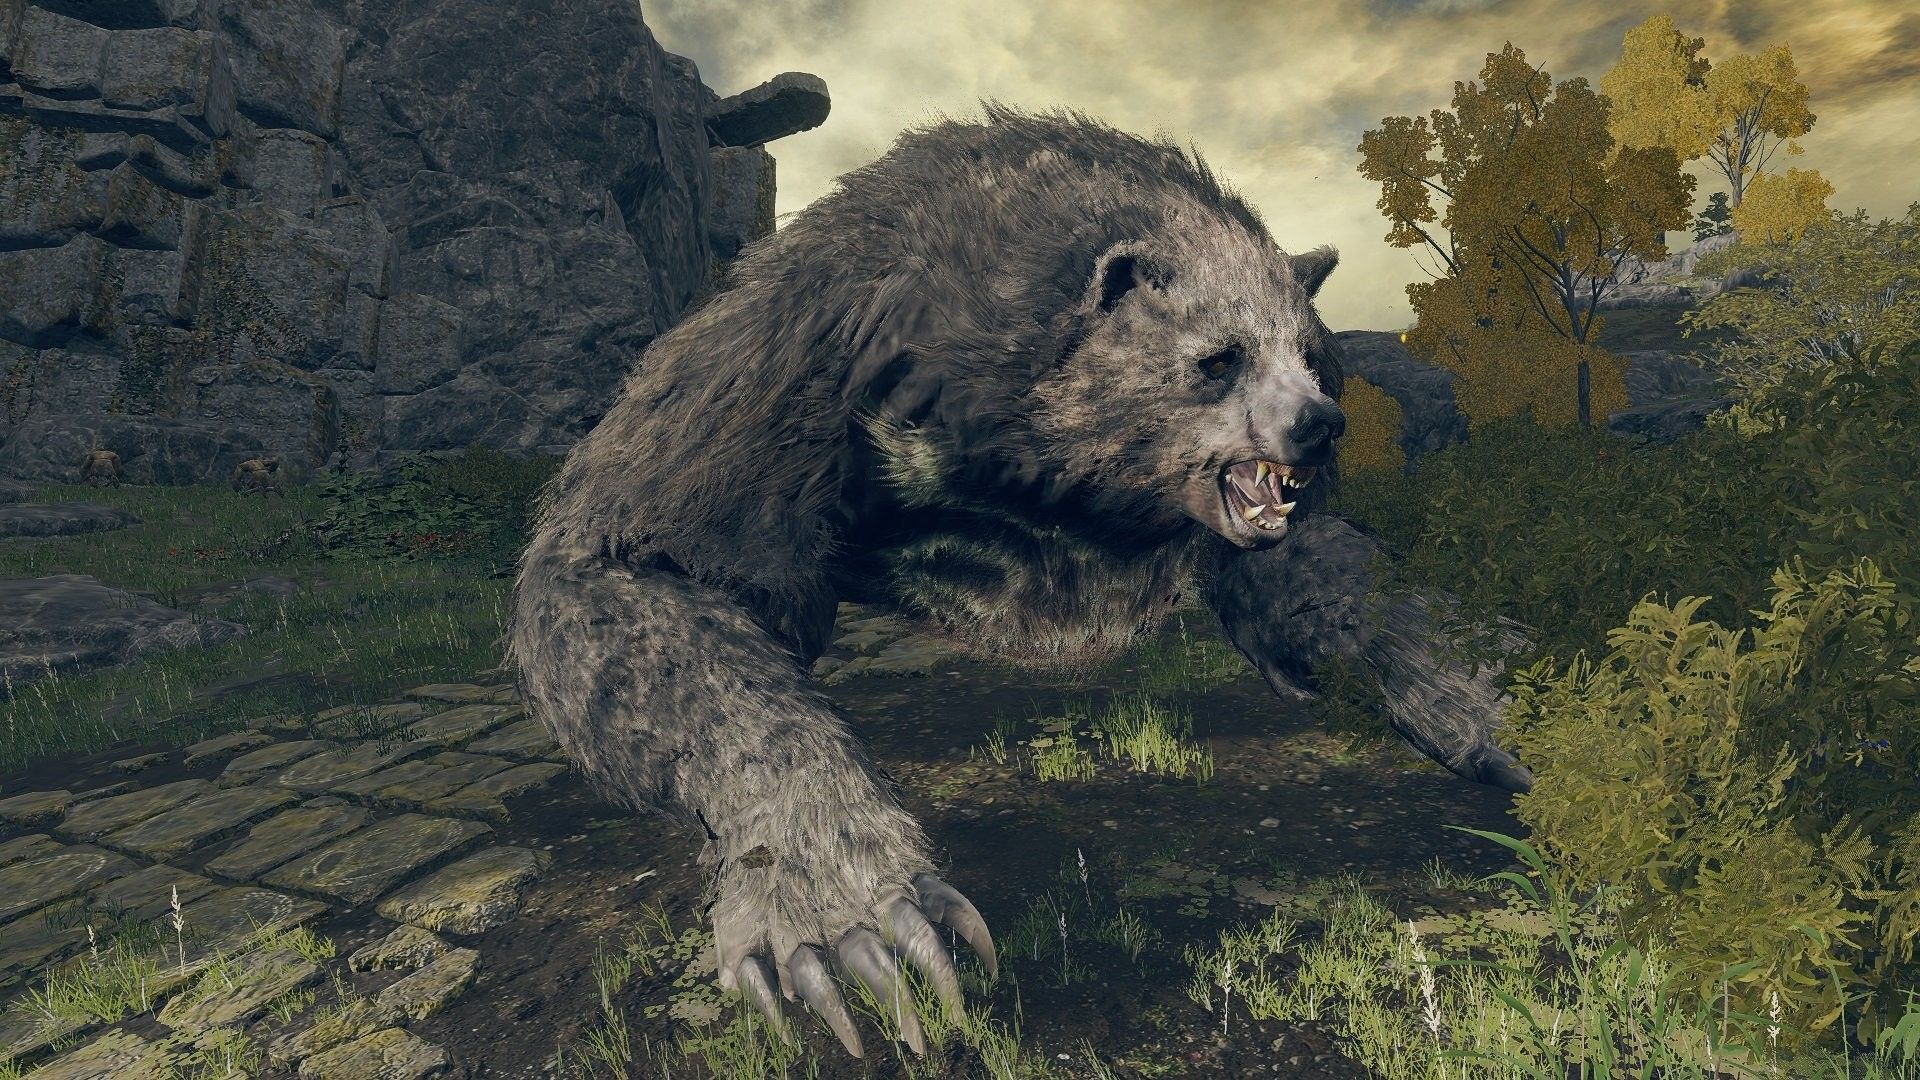 Elden Ring Lesser Runebear enemy growls to side of camera in a forest backdrop with ruins